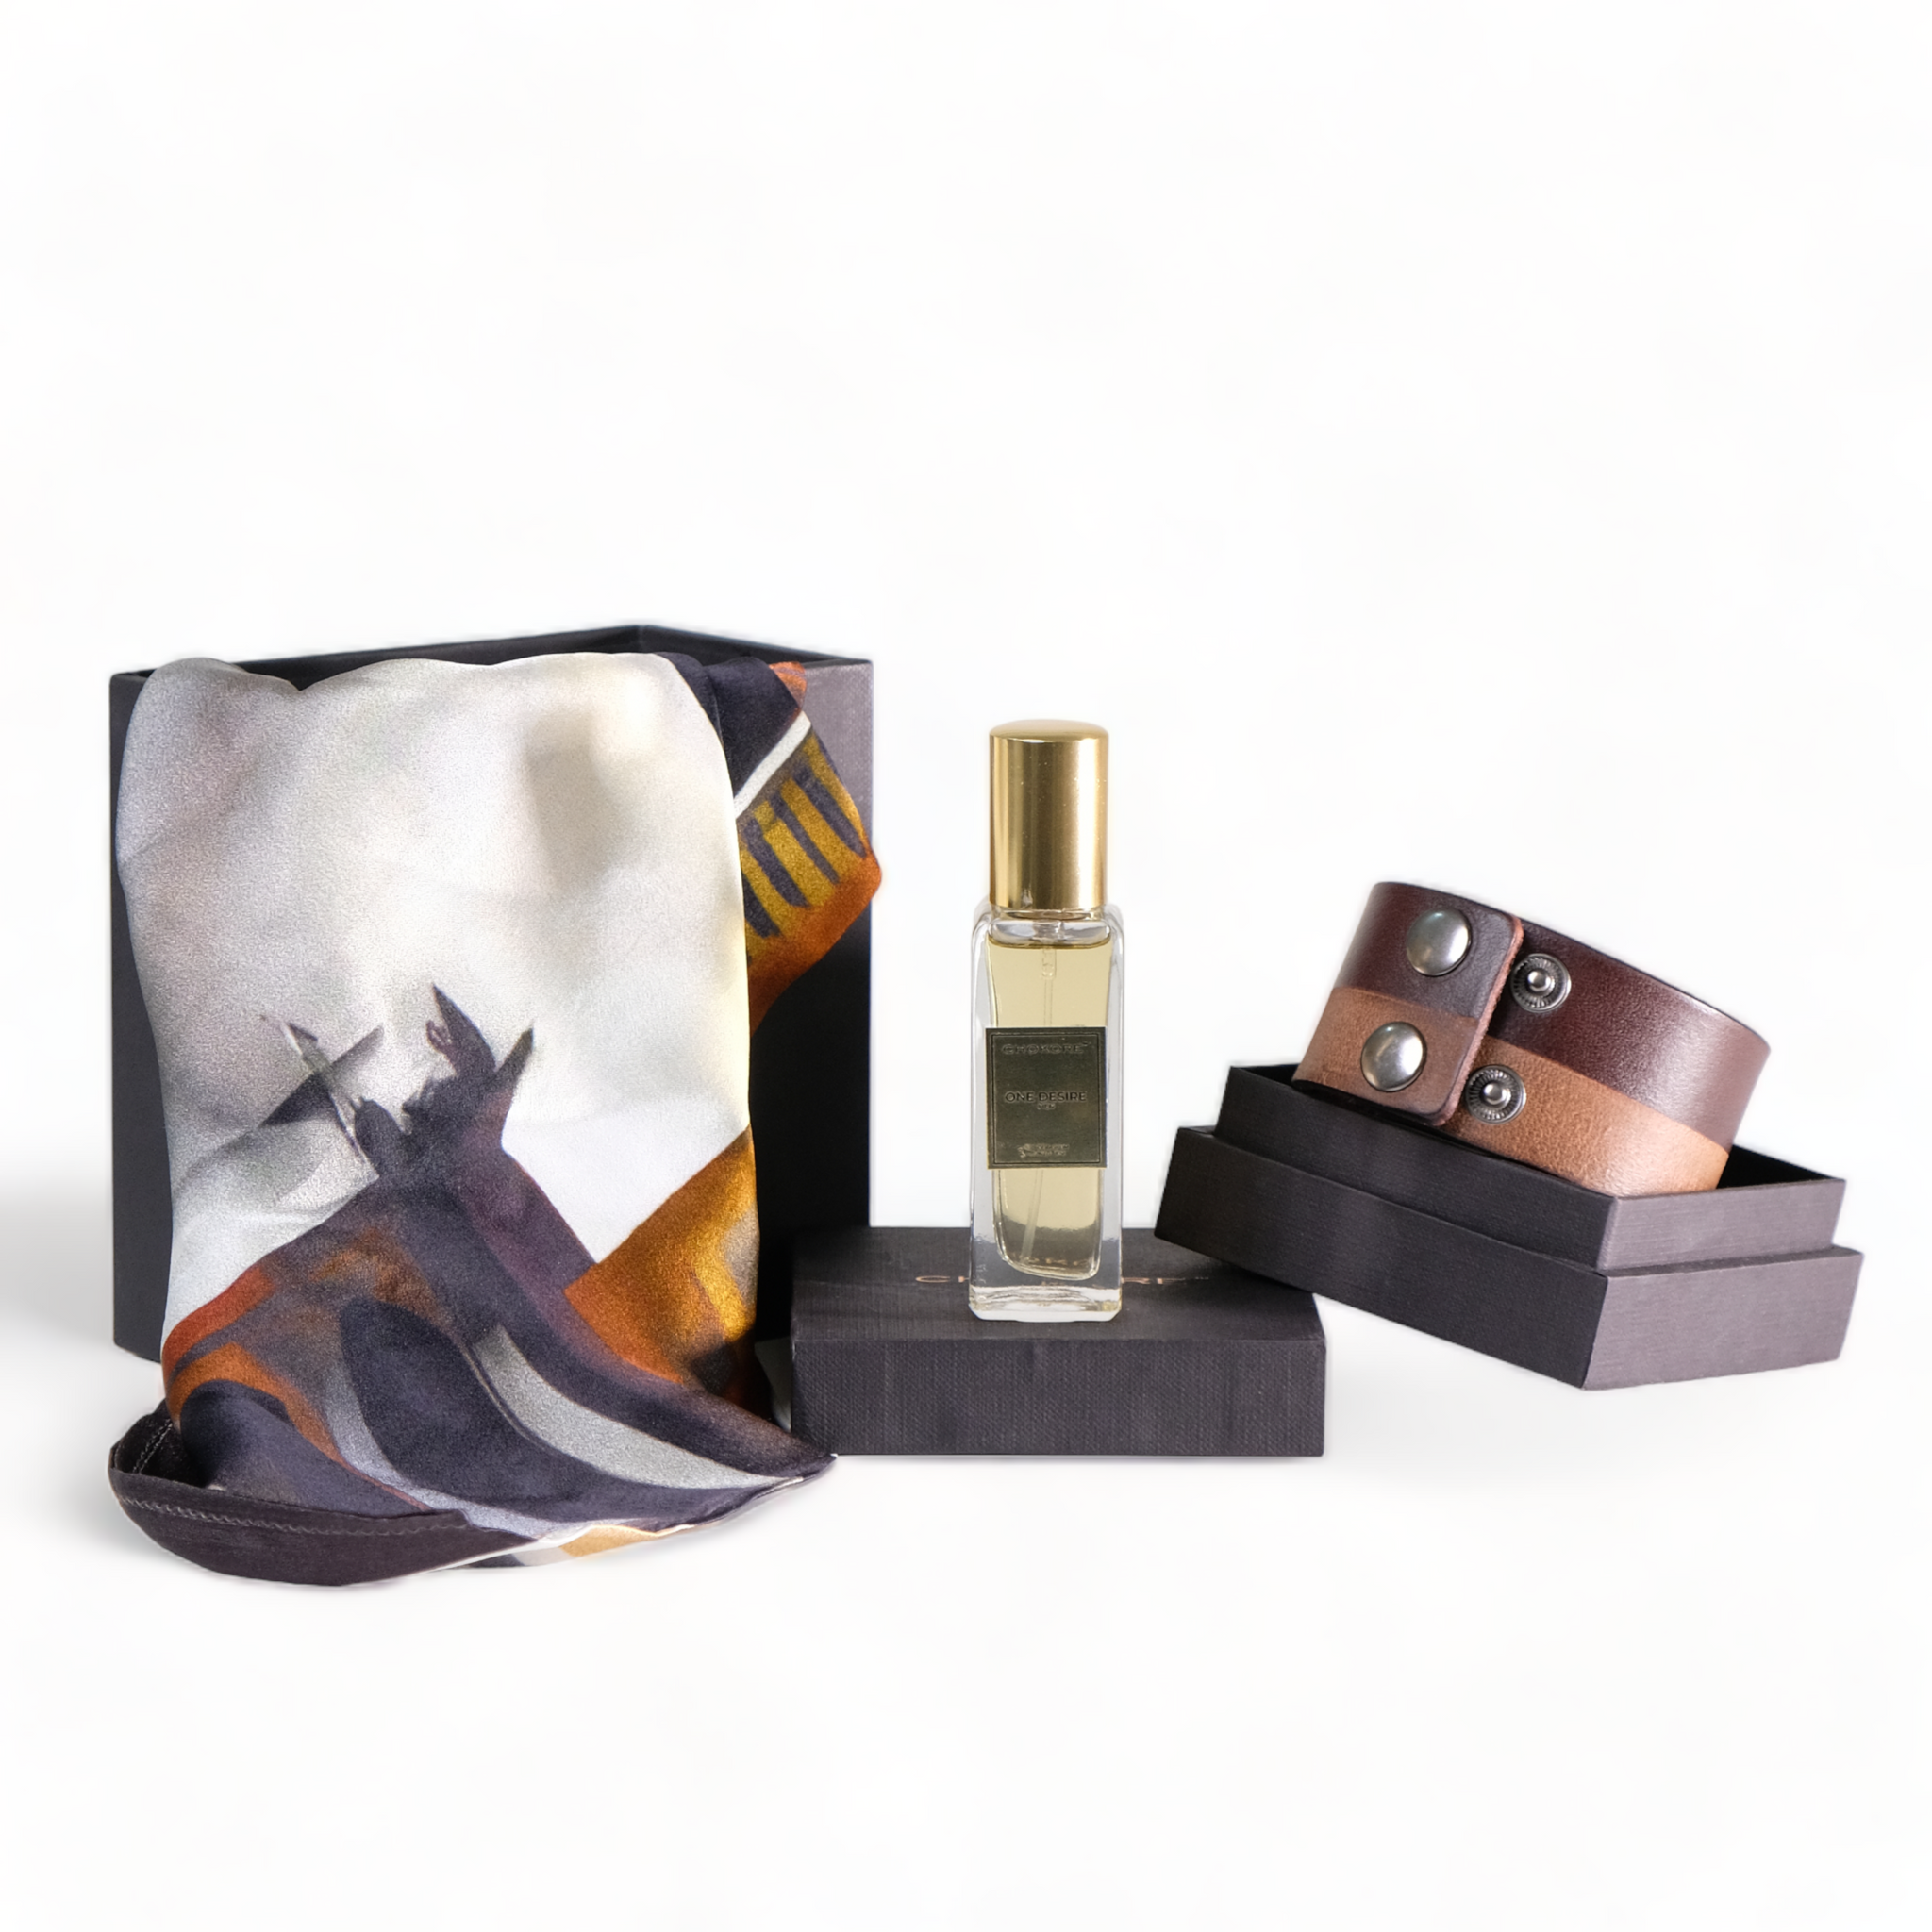 Chokore Special 3-in-1 Gift Set for Him (Lucknow Pocket Square, Leather Bracelet, & 20 ml One Desire Perfume)